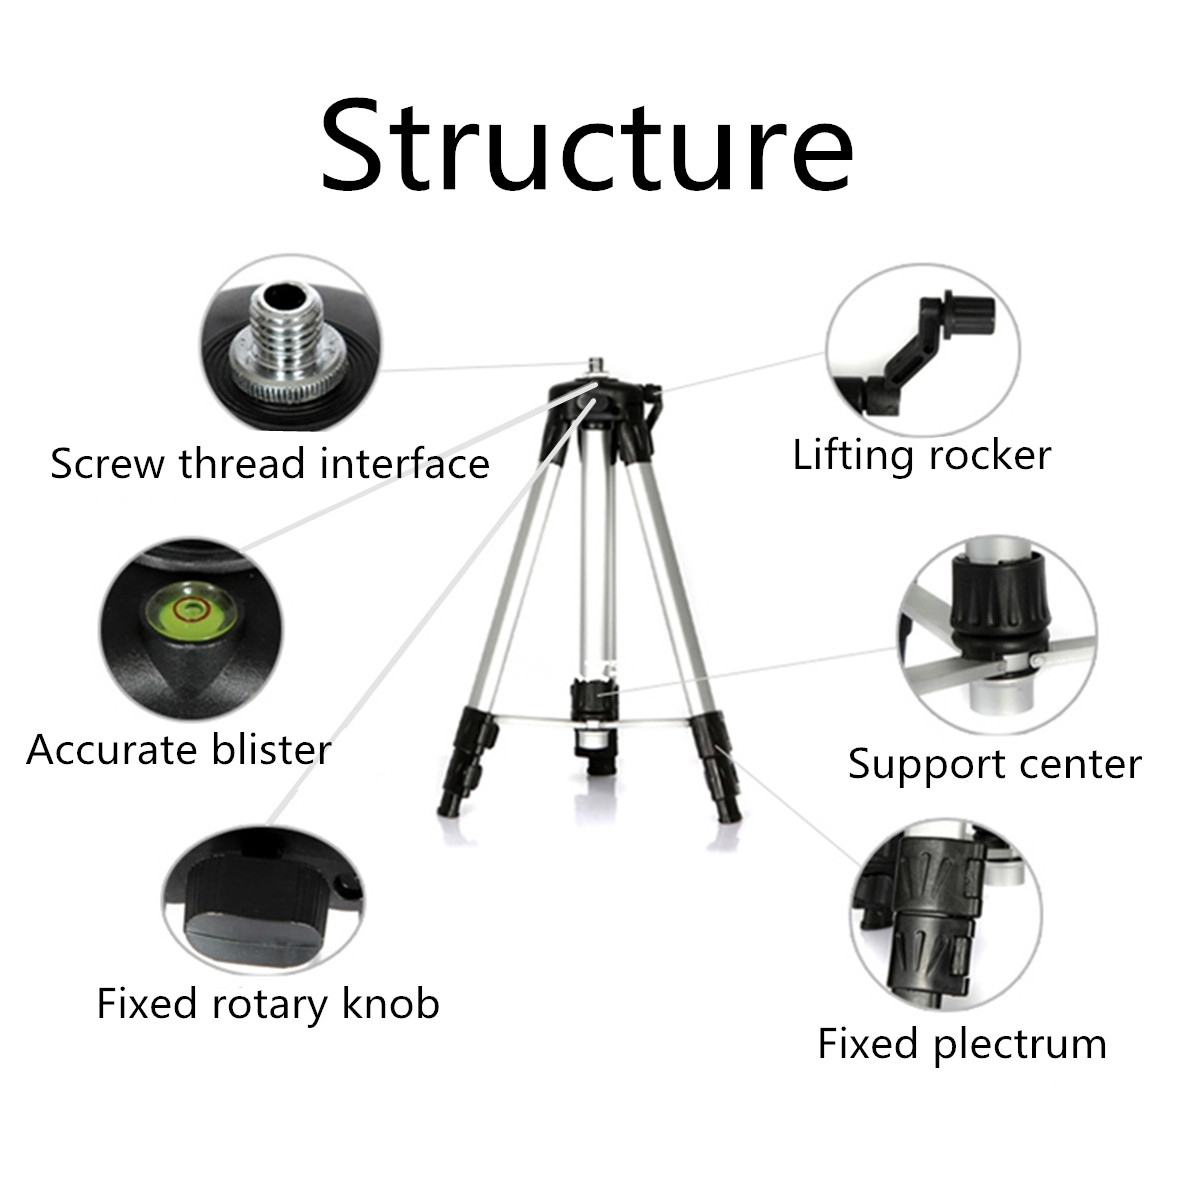 15M-Universal-Adjustable-Alloy-Tripod-Stand-Extension-For-Laser-Air-Level-with-Bag-1153680